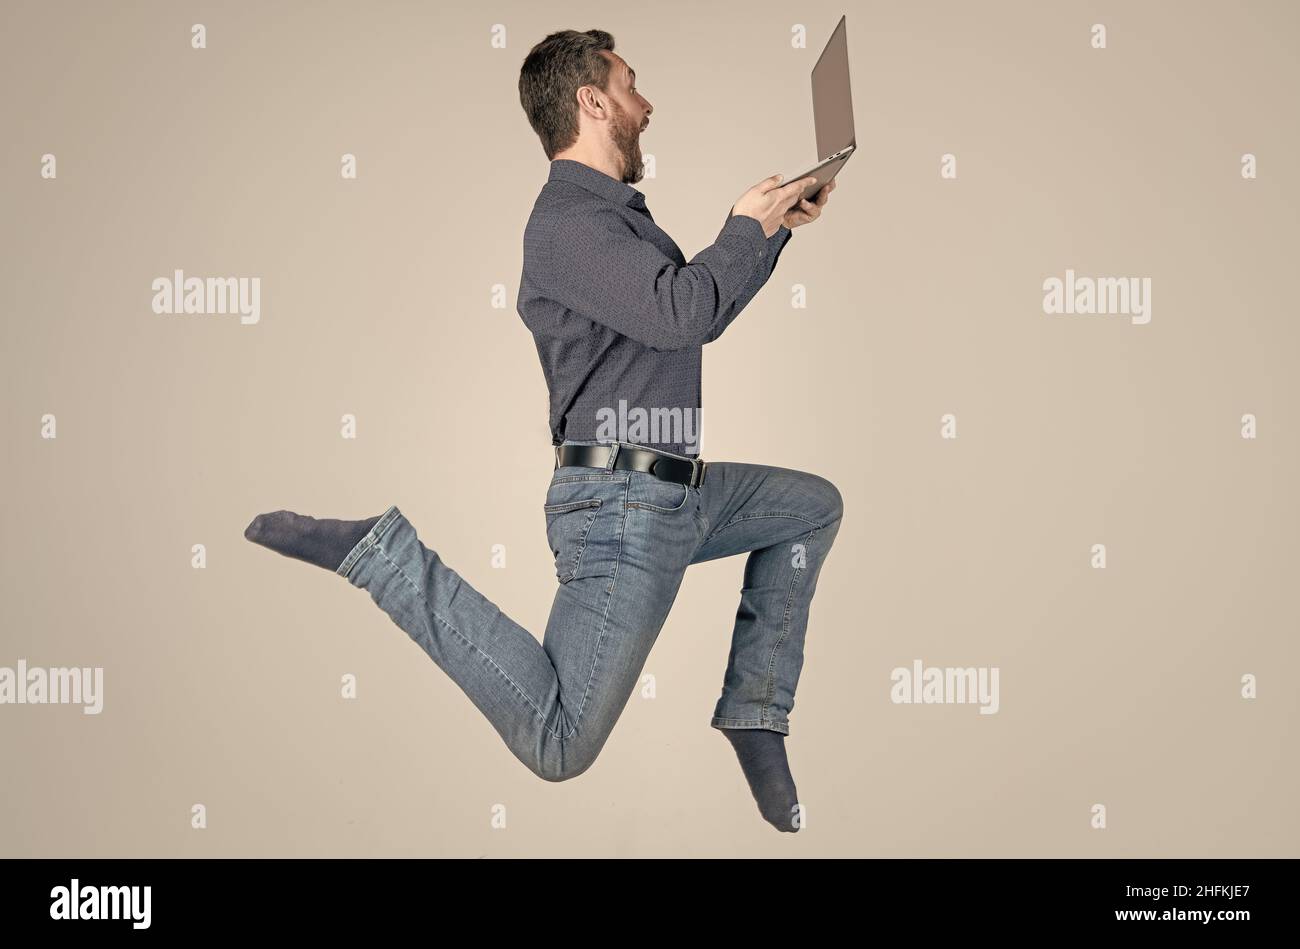 agile business. network administrator hold computer. energetic boss with wireless laptop. Stock Photo